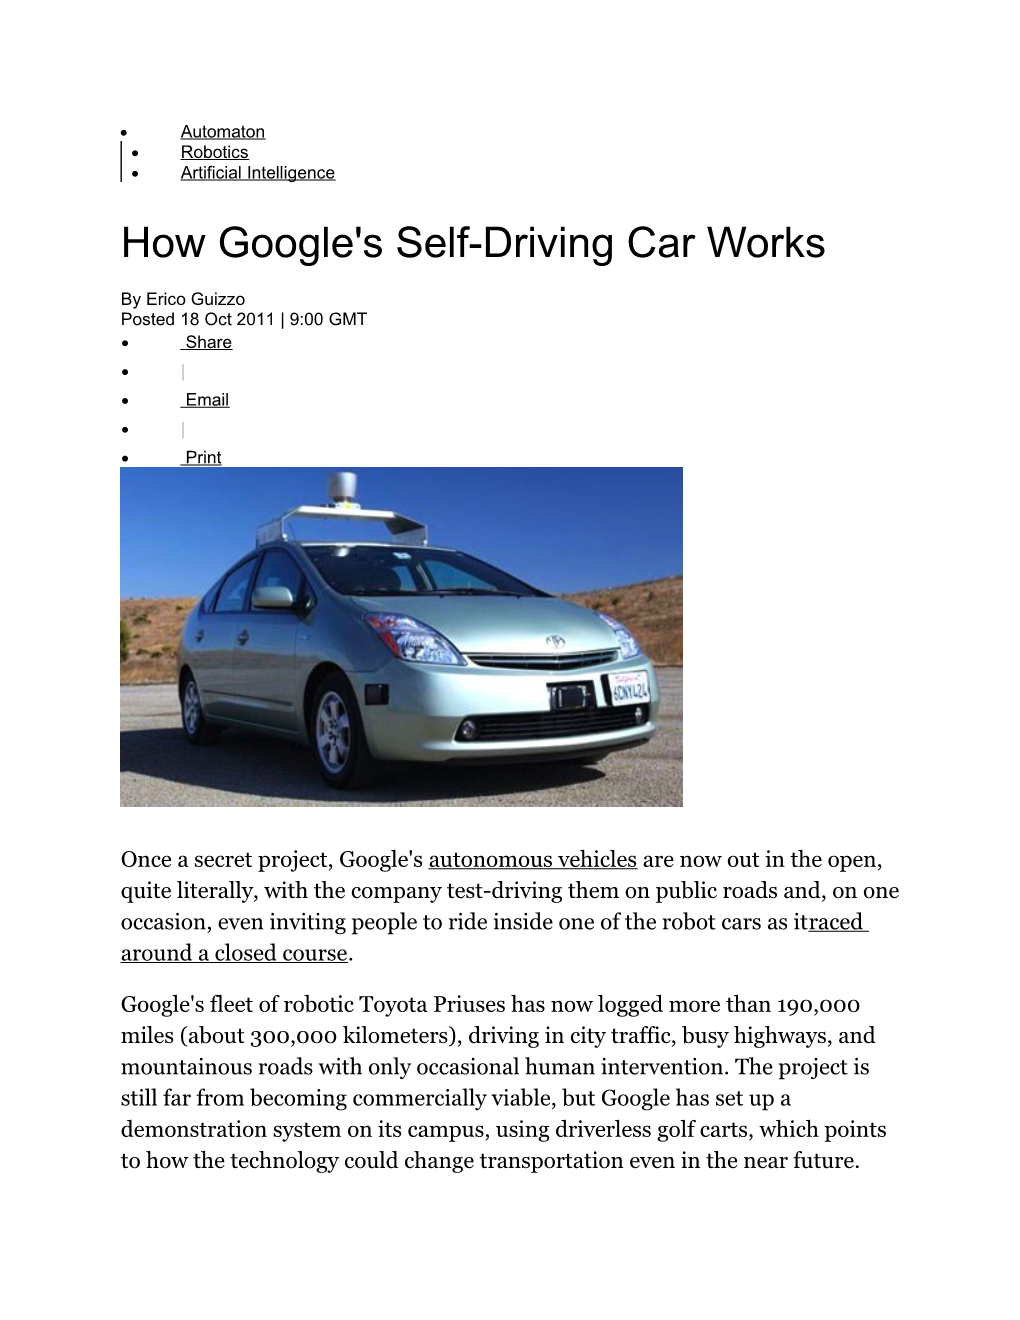 How Google's Self-Driving Car Works